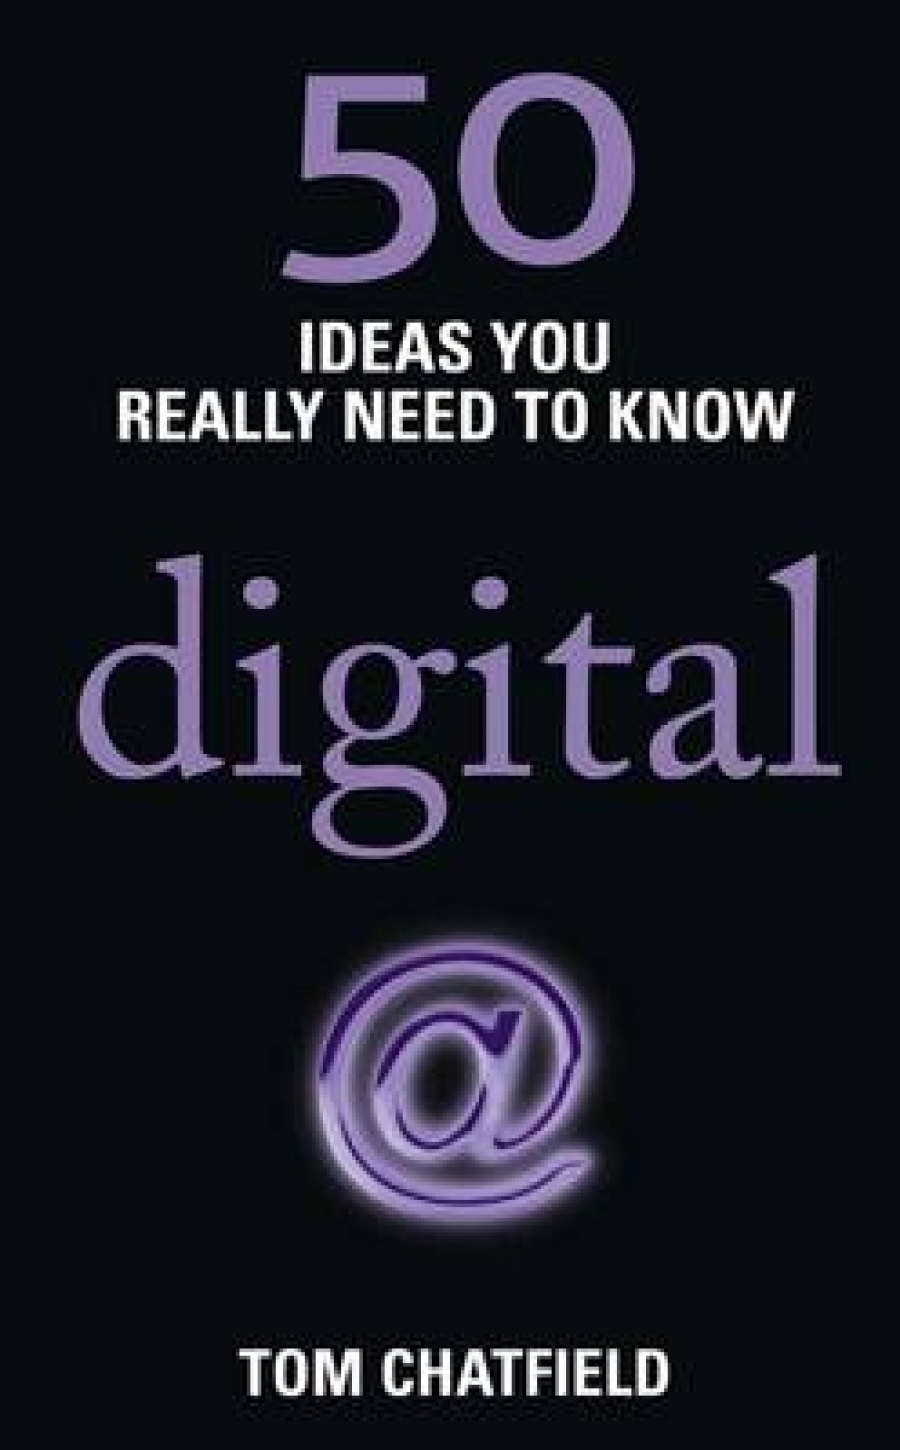 Tom Chatfield 50 Ideas You Really Need to Know: Digital 